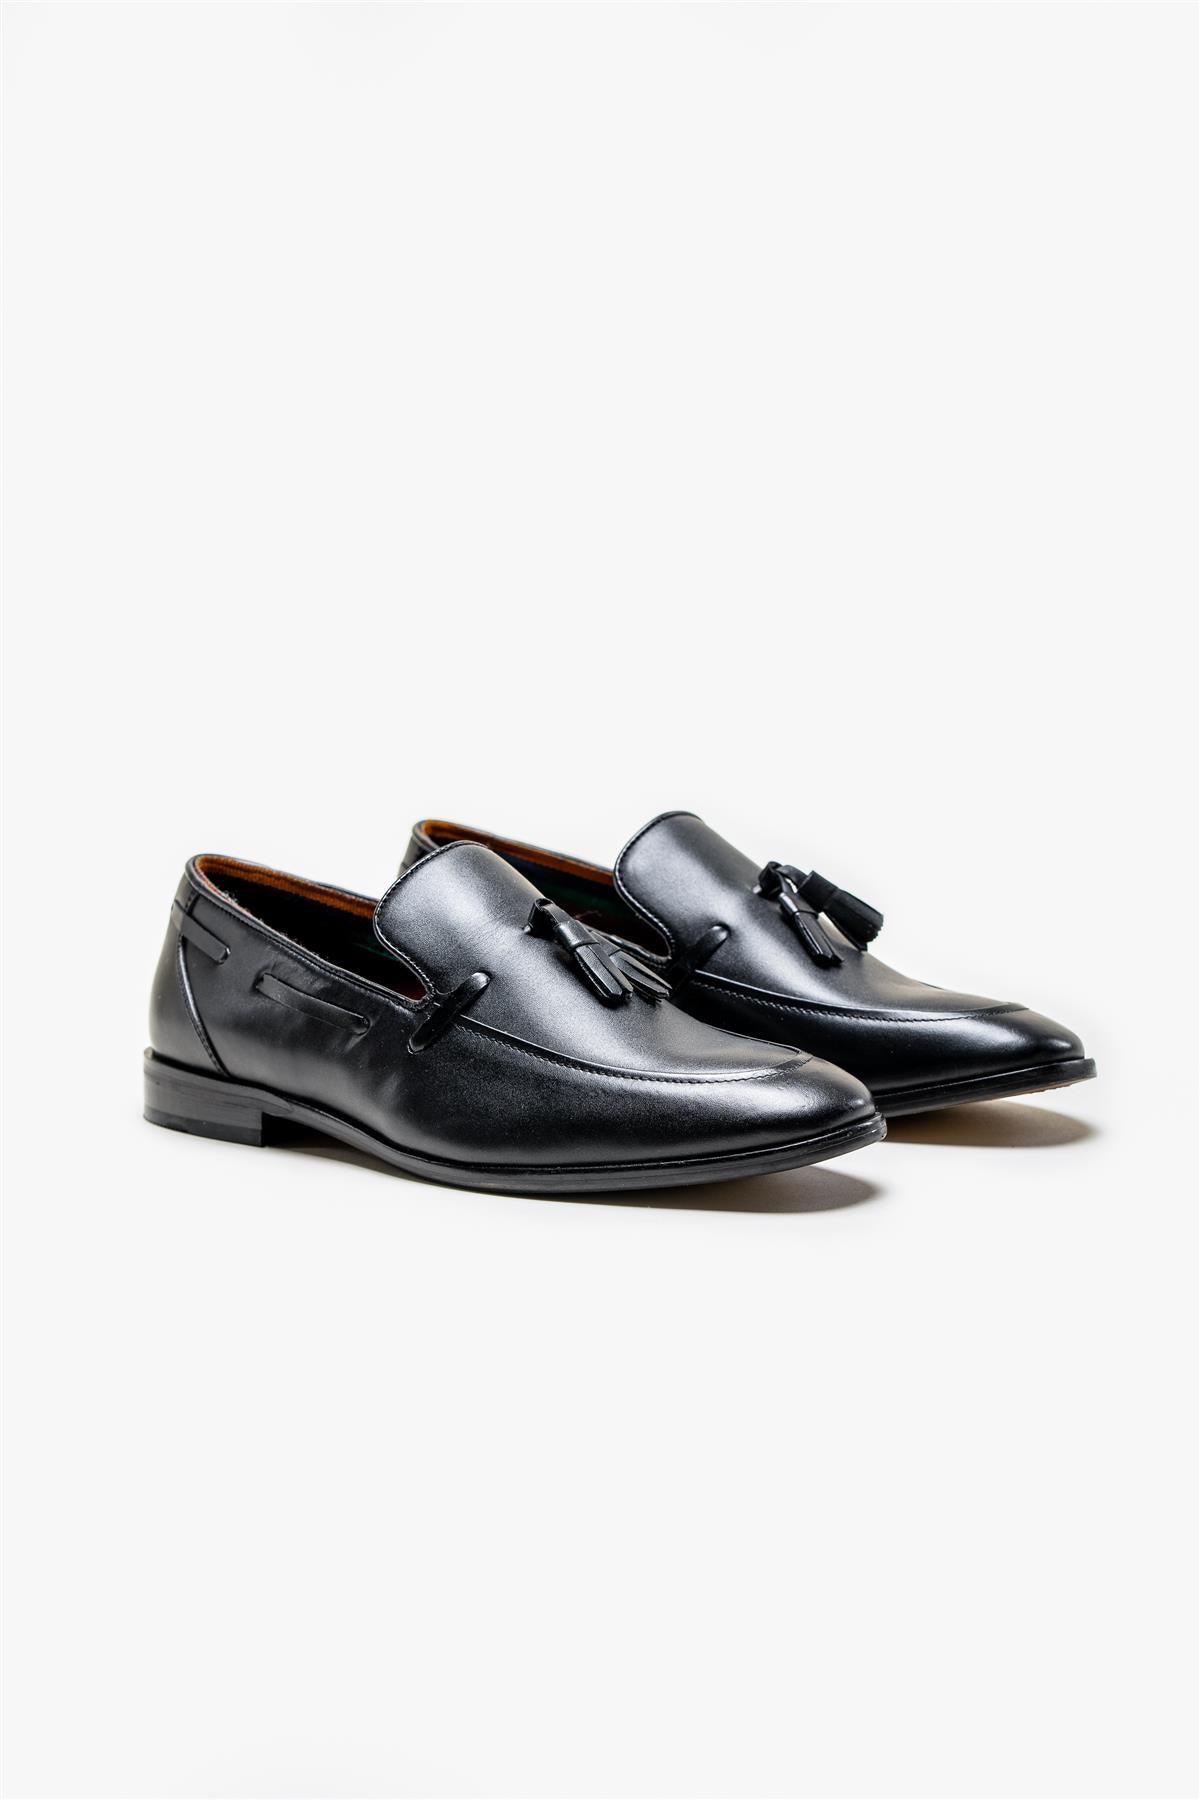 Freemont black loafers front